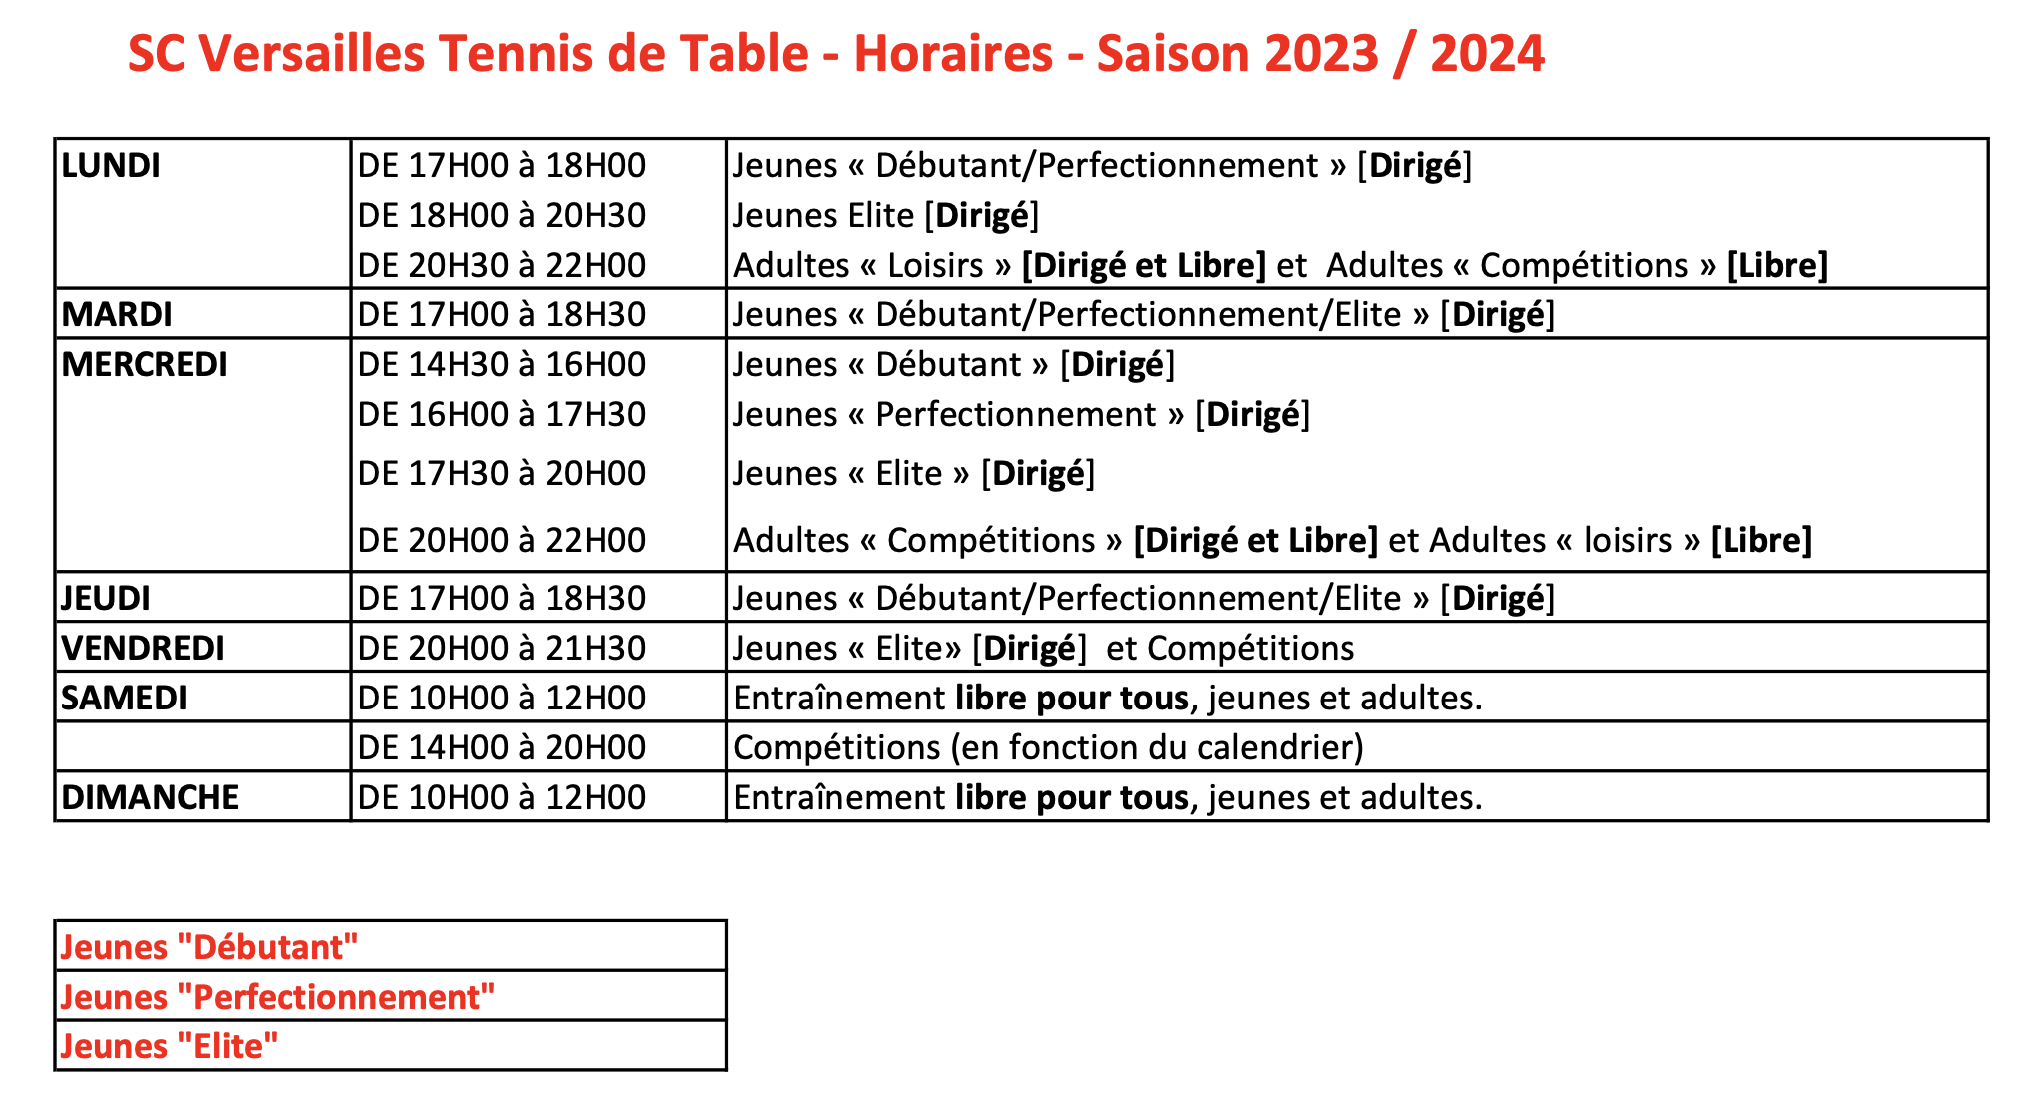 Horaires_2324.png